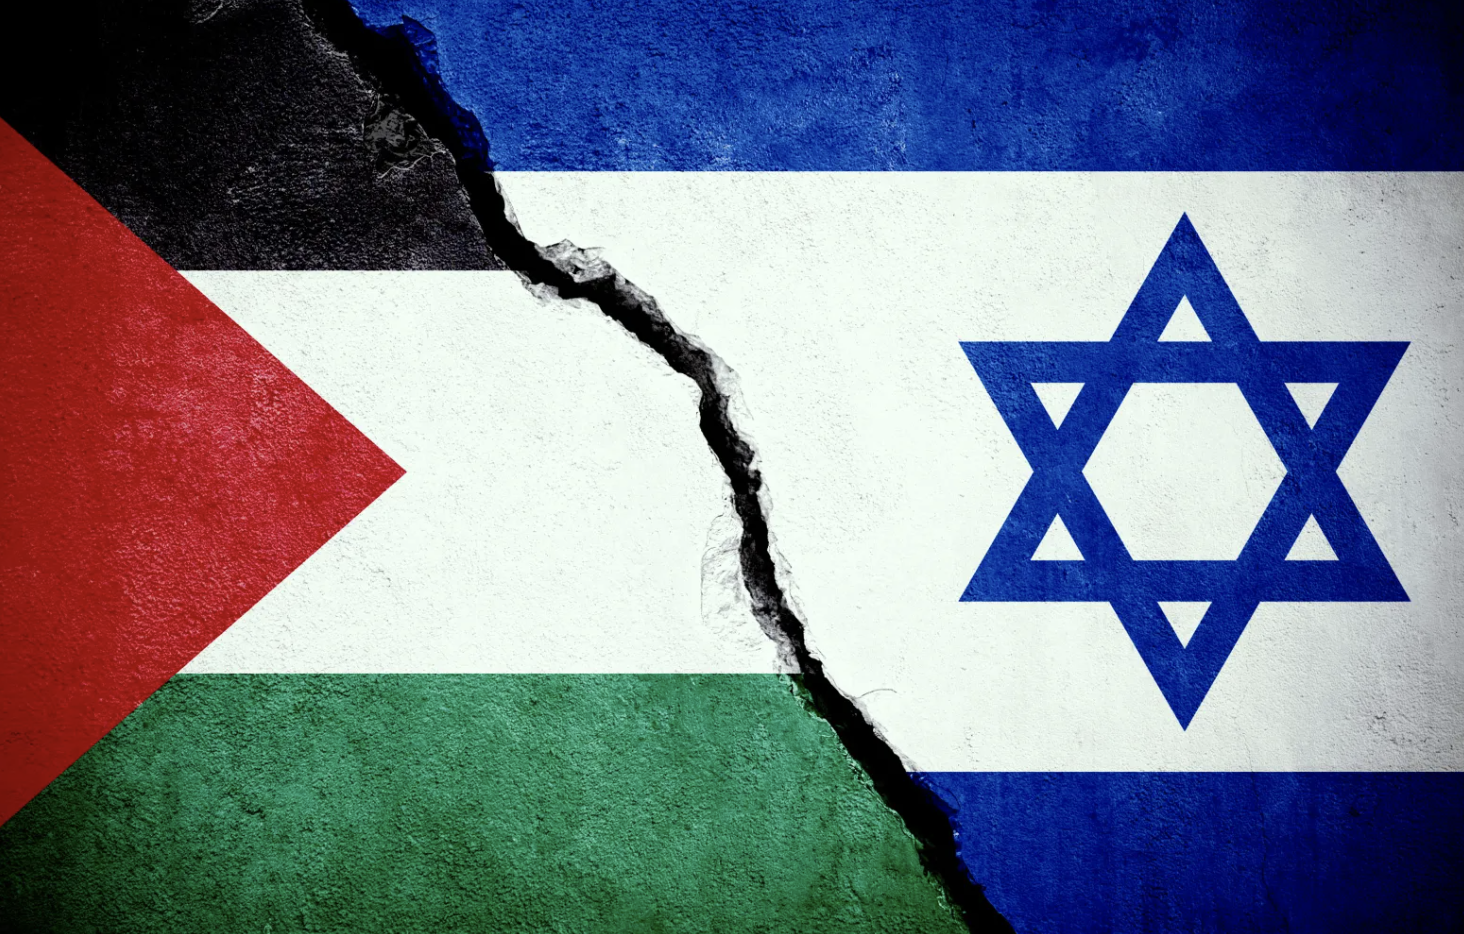 Revolutionary Leadership, Courage and Tough Decisions — Israel and Palestine’s Route to Peace